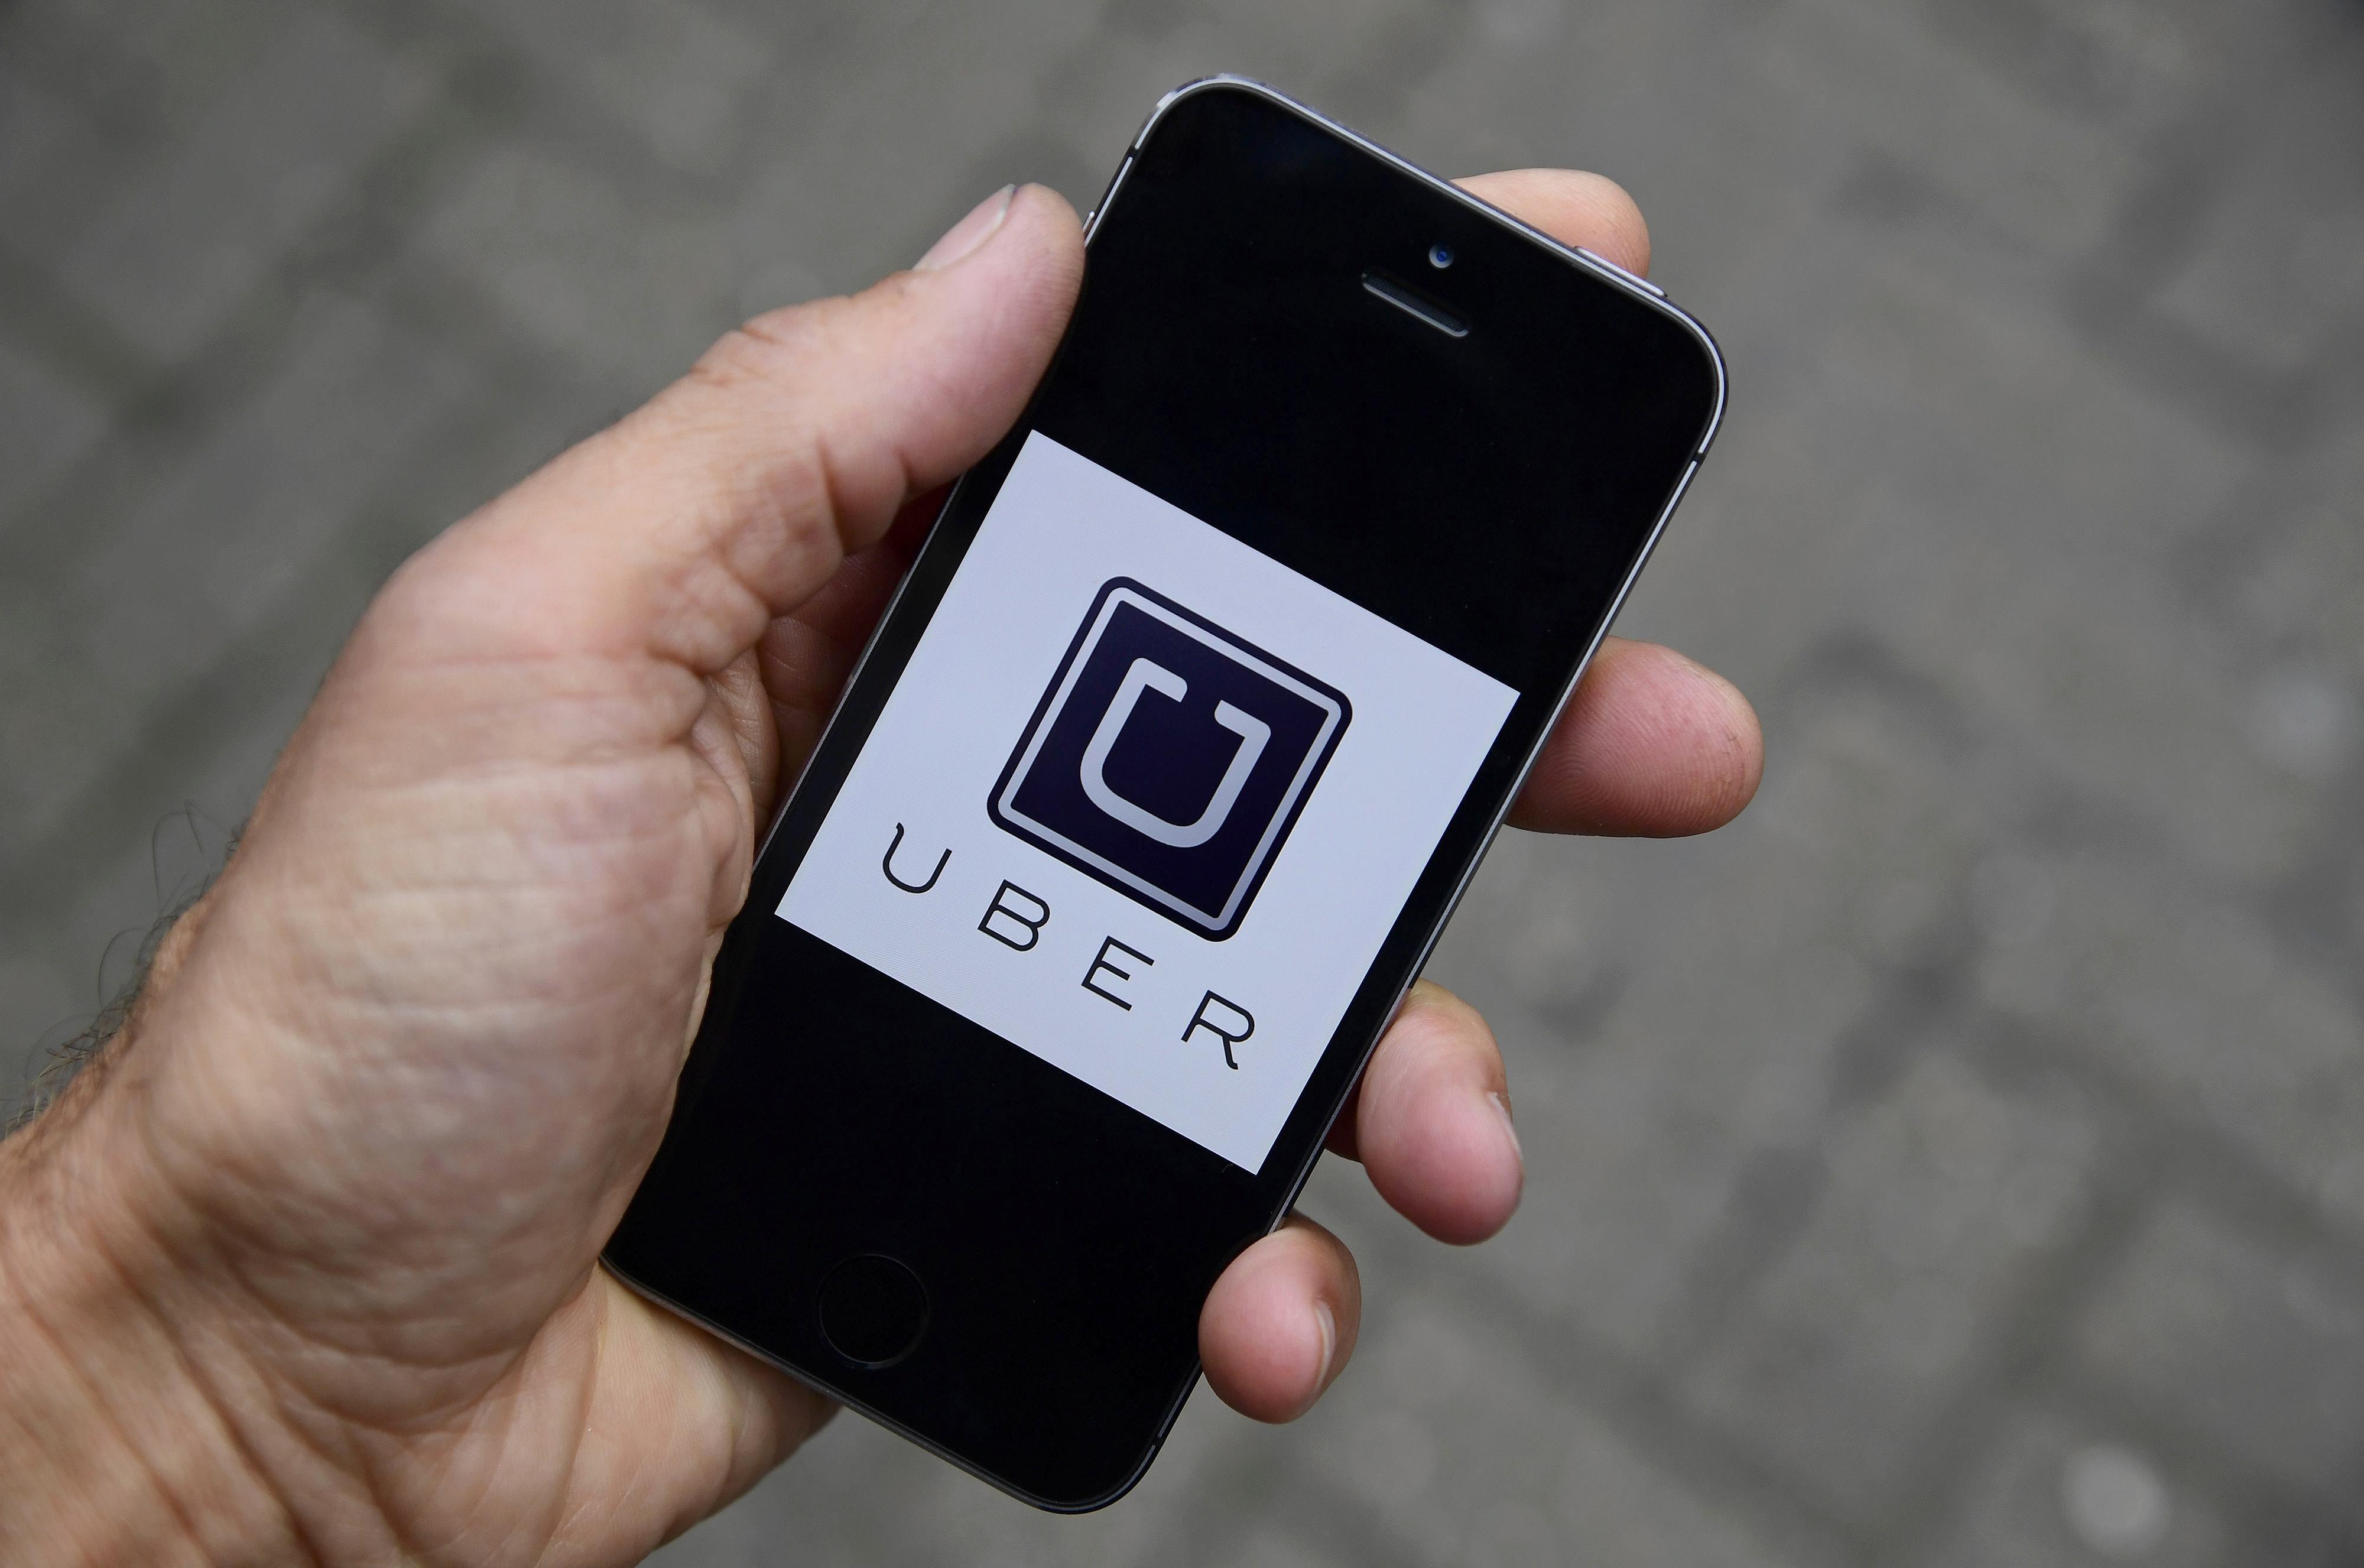 A photo illustration shows the Uber app logo displayed on a mobile telephone, as it is held up for a